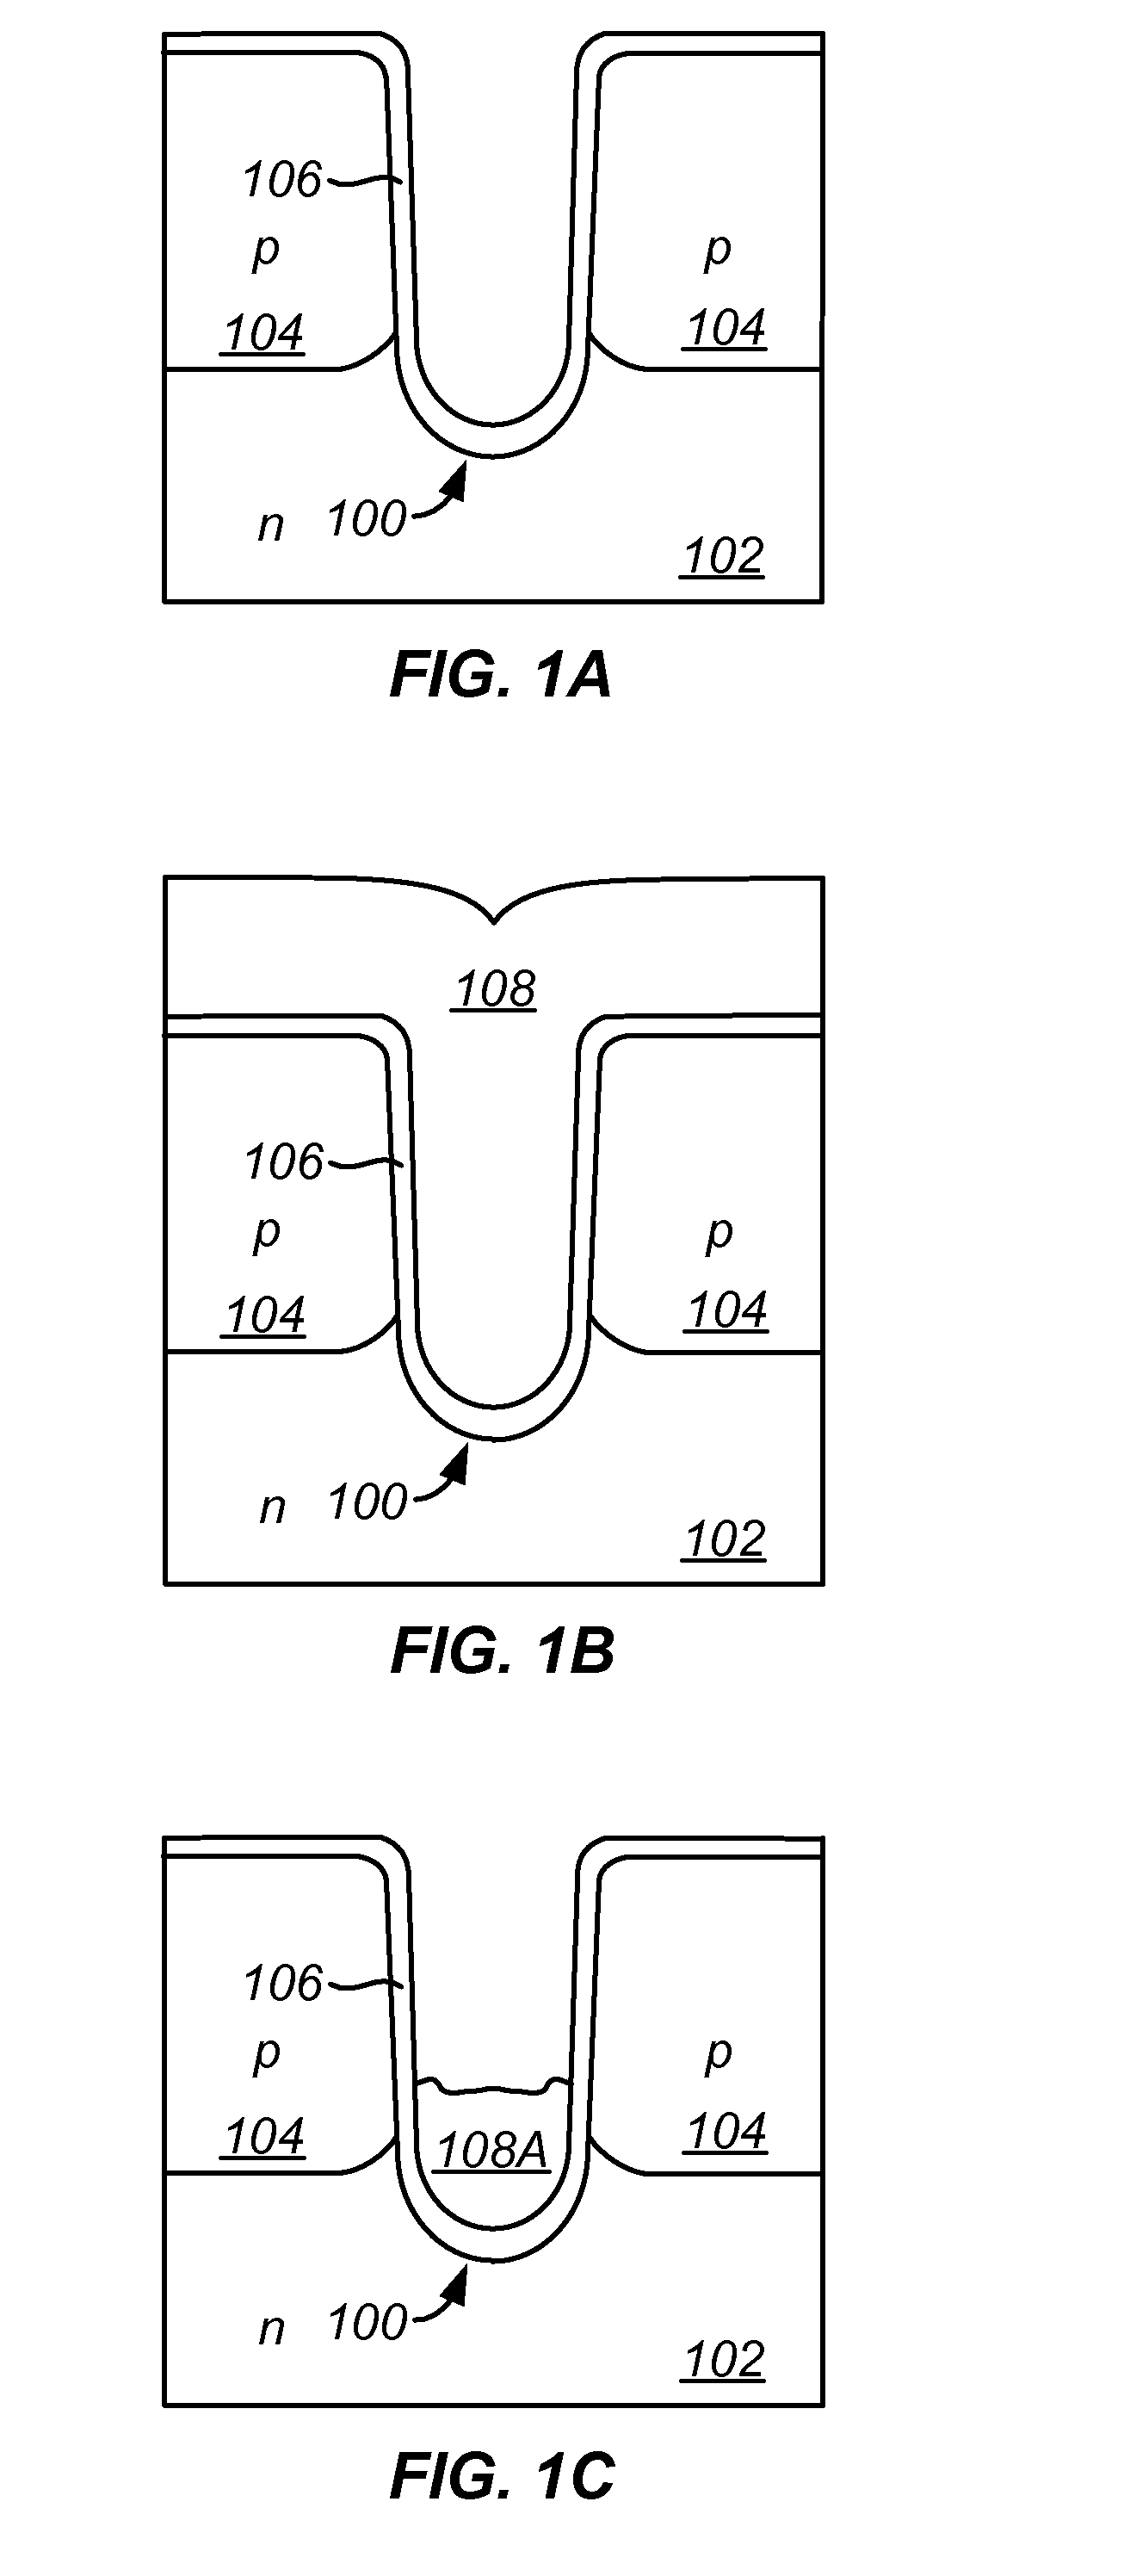 Low resistance gate for power mosfet applications and method of manufacture